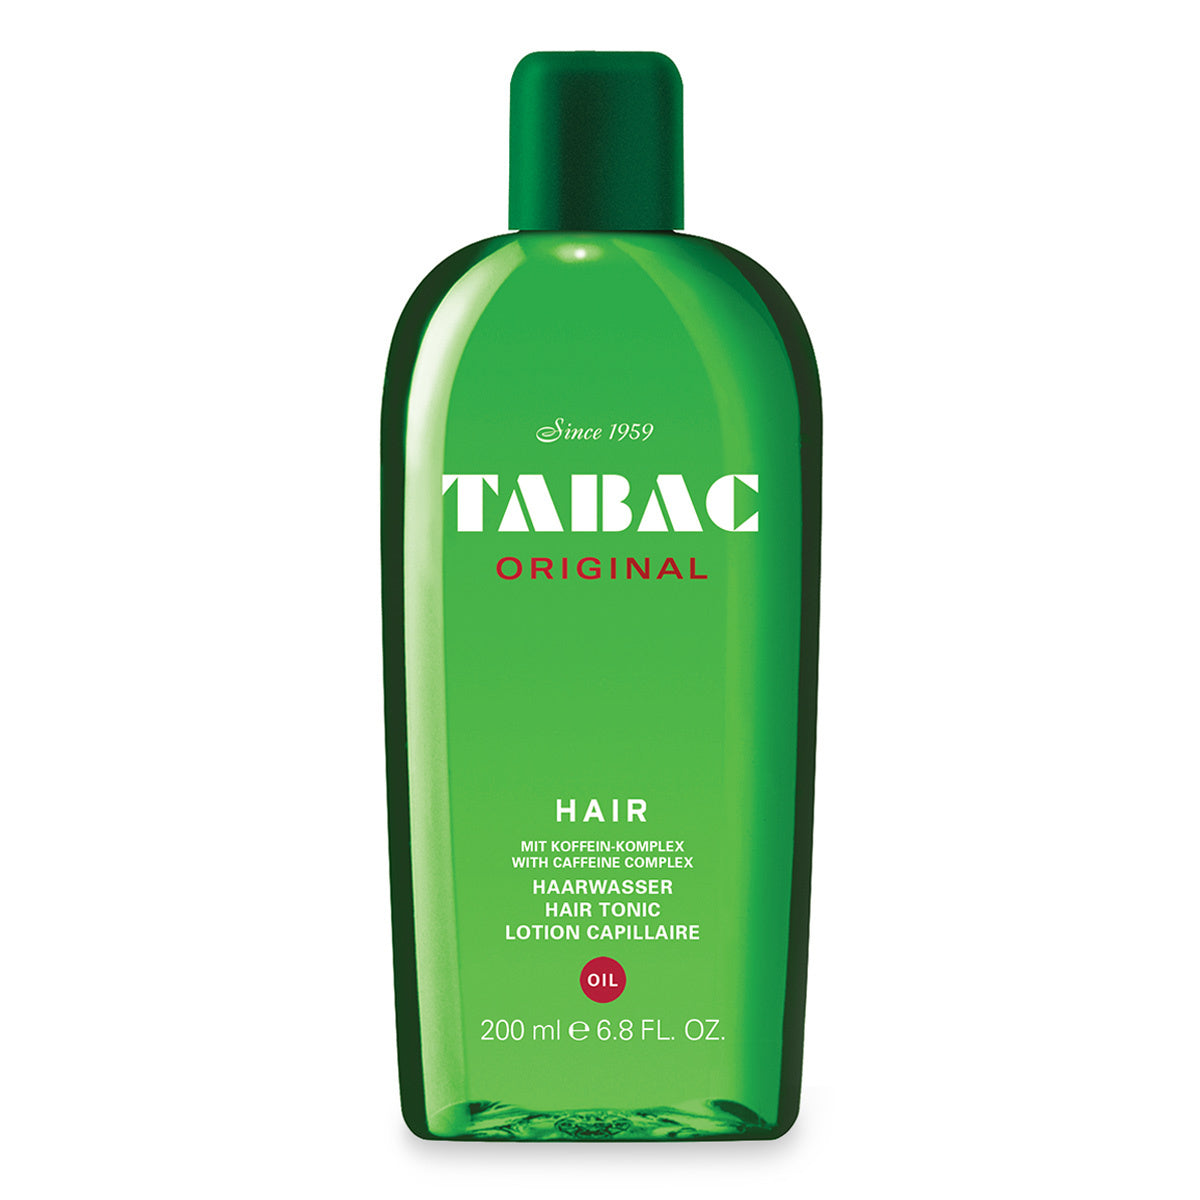 Primary image of Tabac Original Hair Tonic Lotion Oil